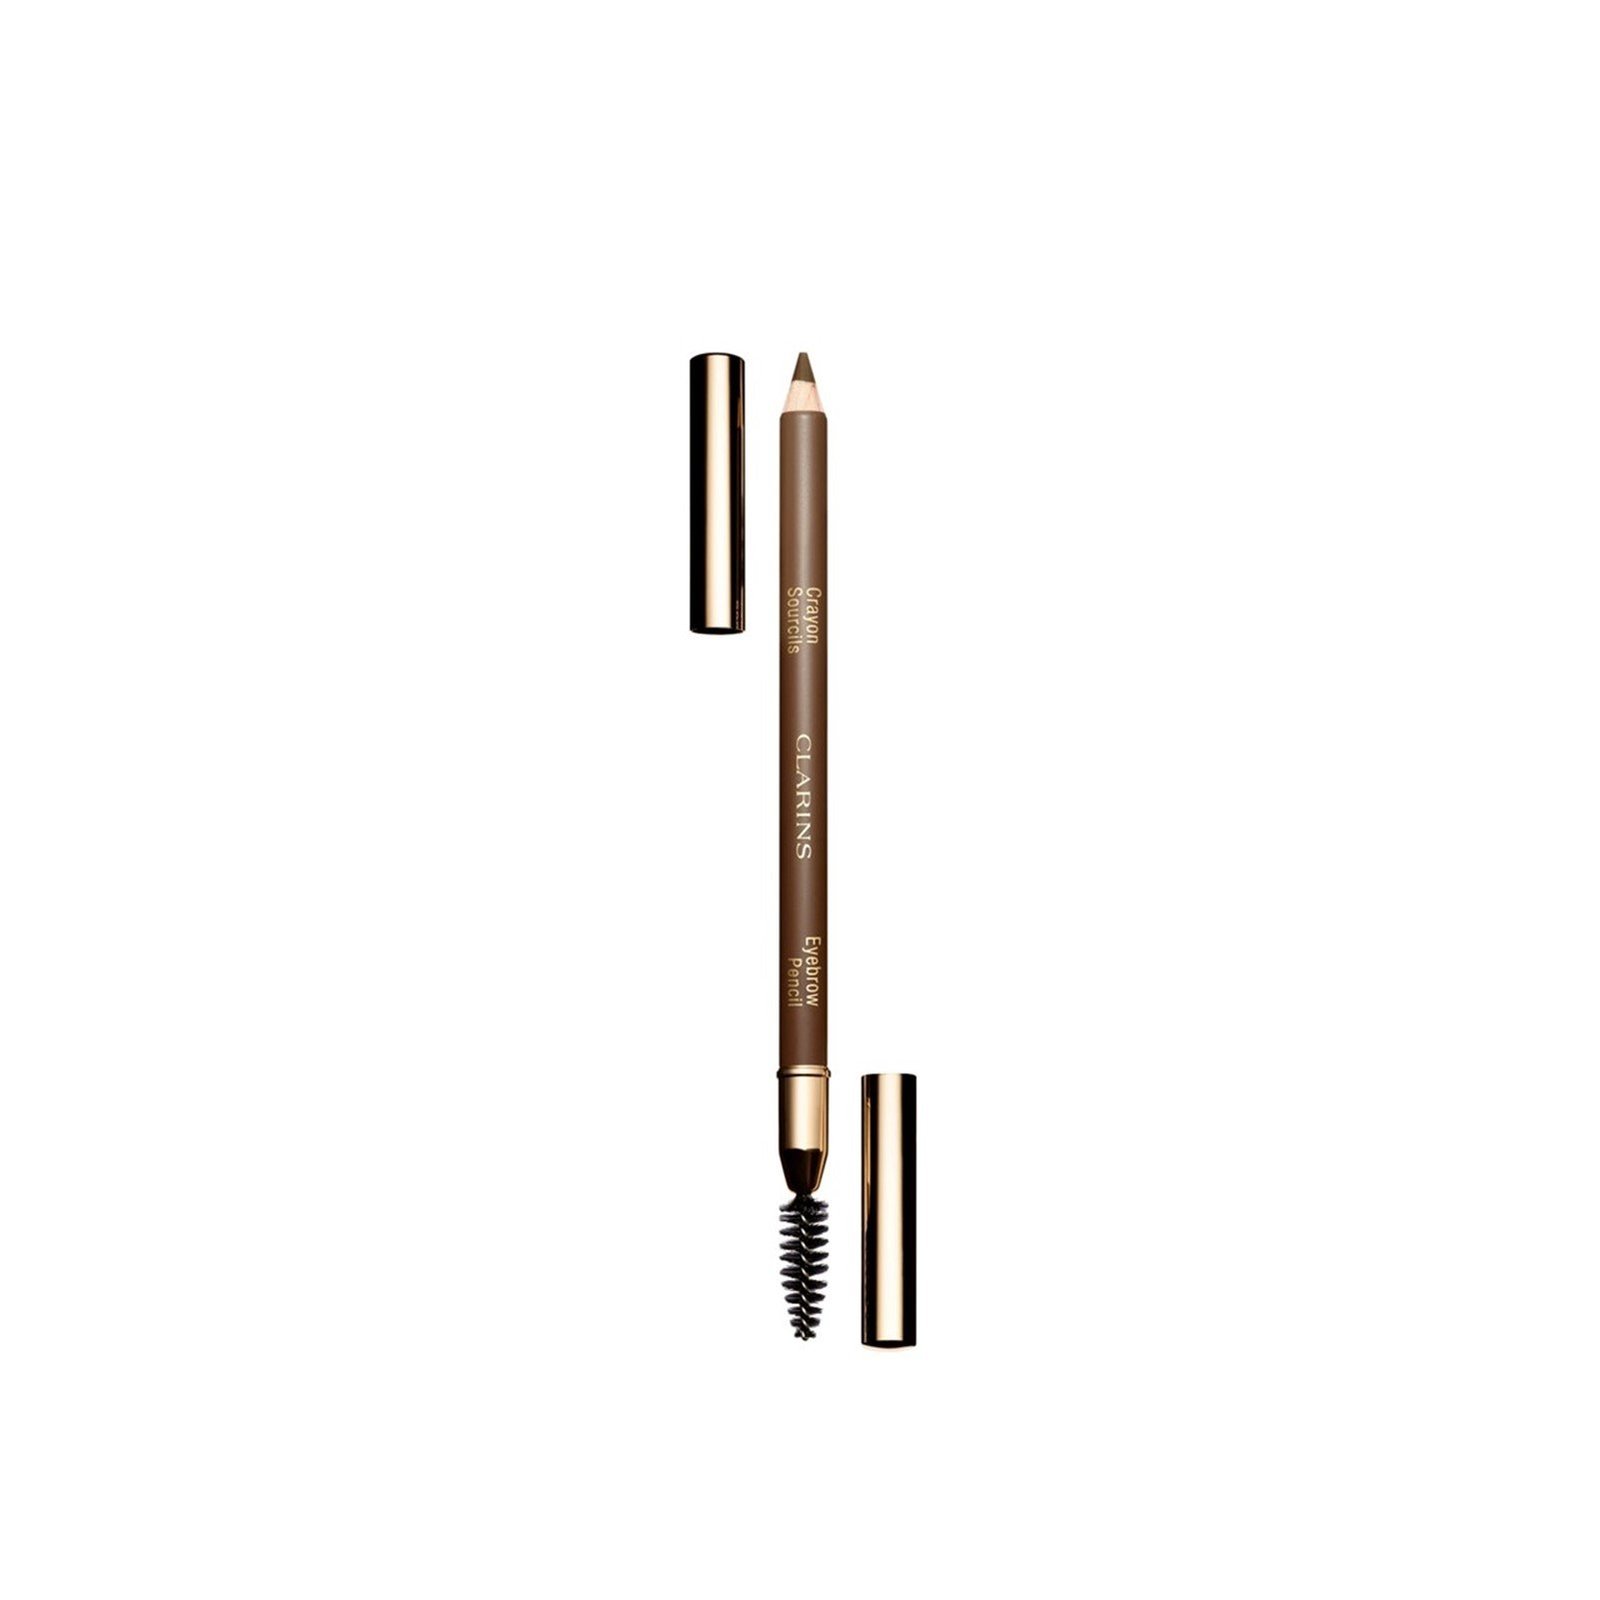 Clarins Eyebrow Pencil Long-Wearing 03 Soft Blond 1.1g